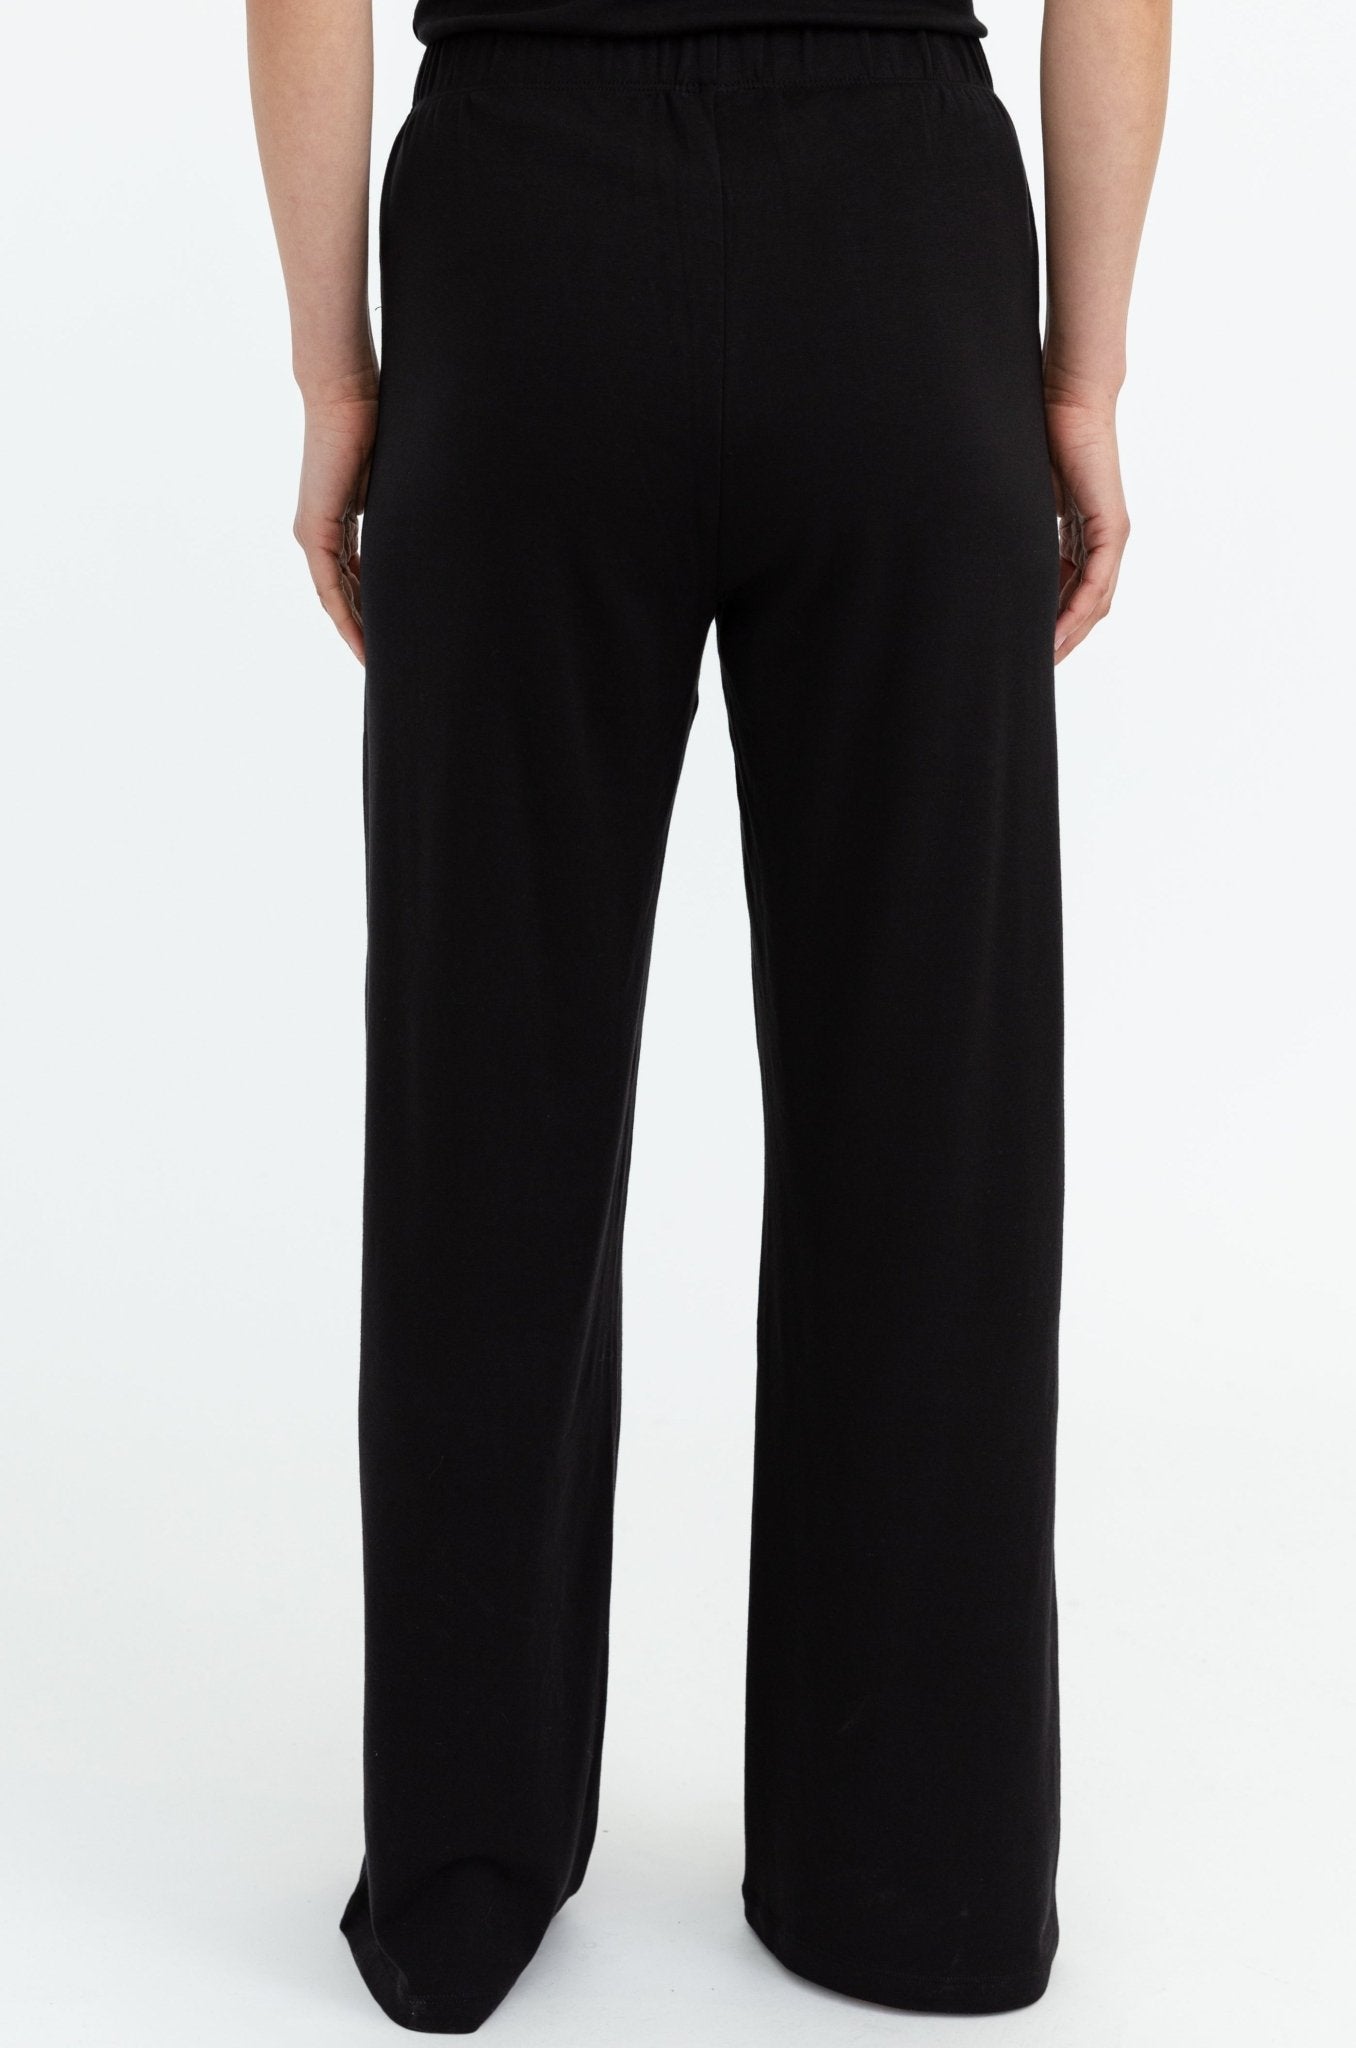 PALM PANT IN PIMA COTTON STRETCH - Jarbo